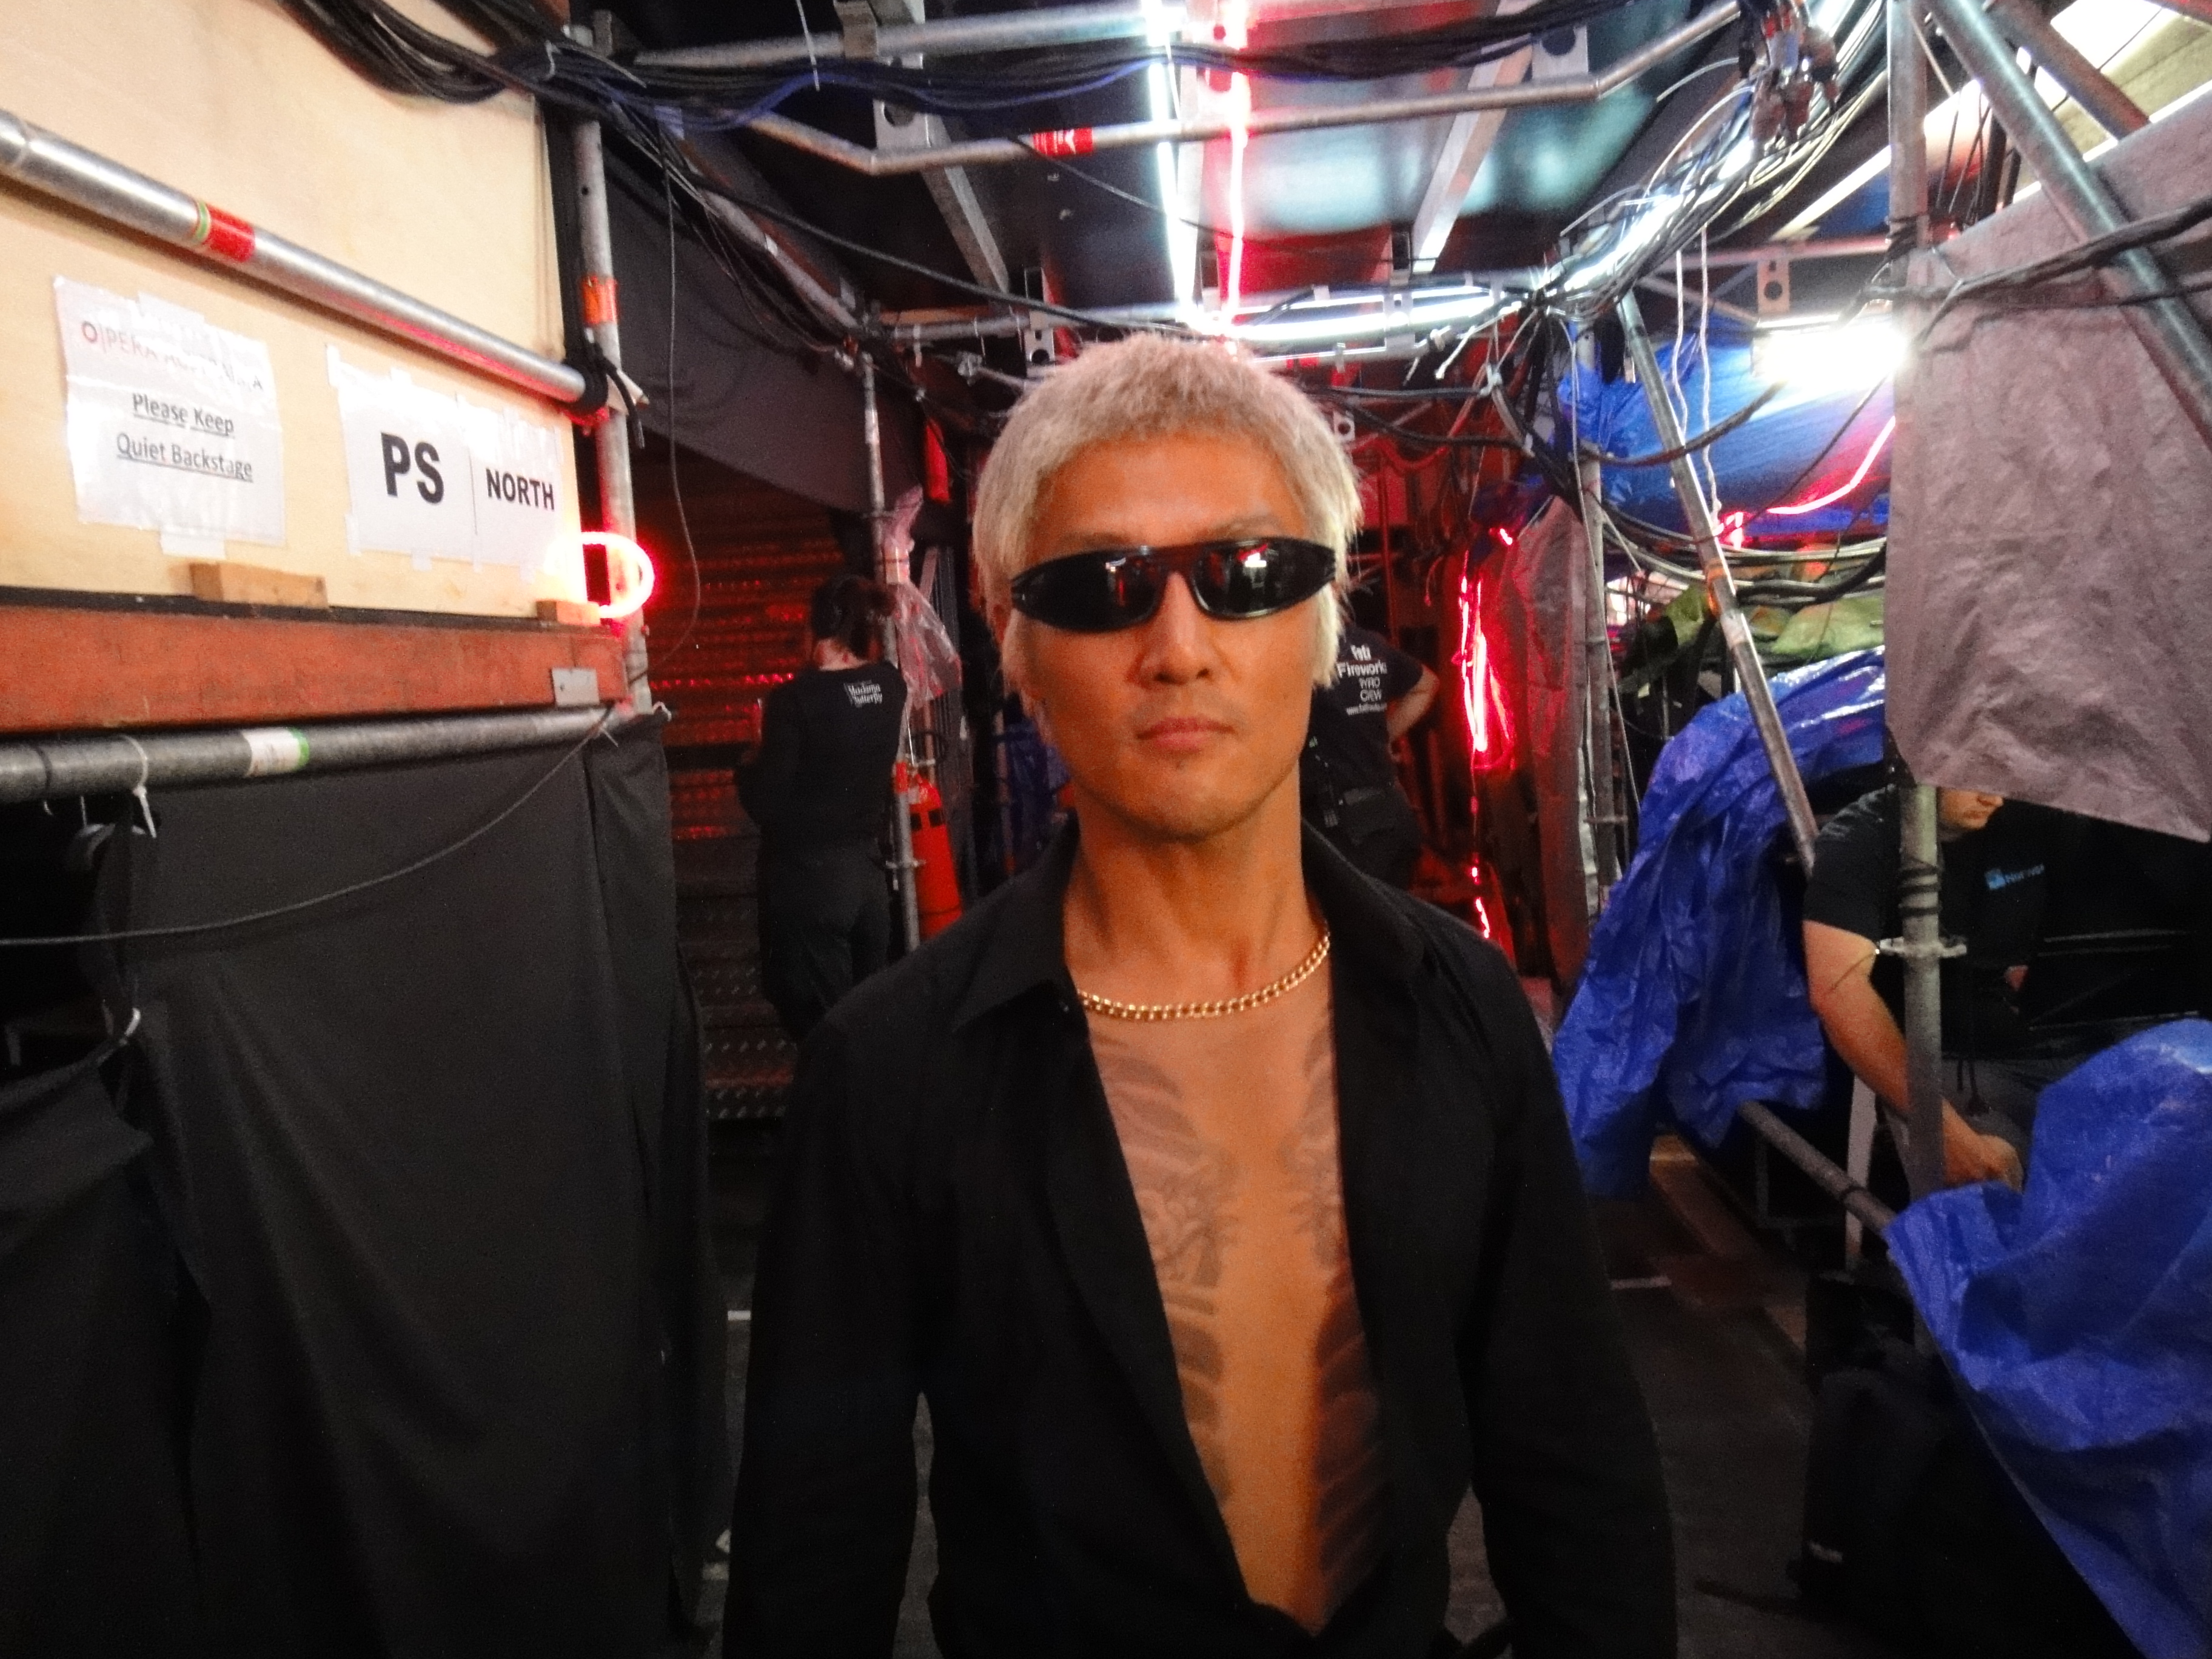 Khanh as Yakuza henchman/Bonze entourage backstage during filming night 2 for Handa Opera on Sydney Harbour's Madama Butterfly 3rd April 2014.